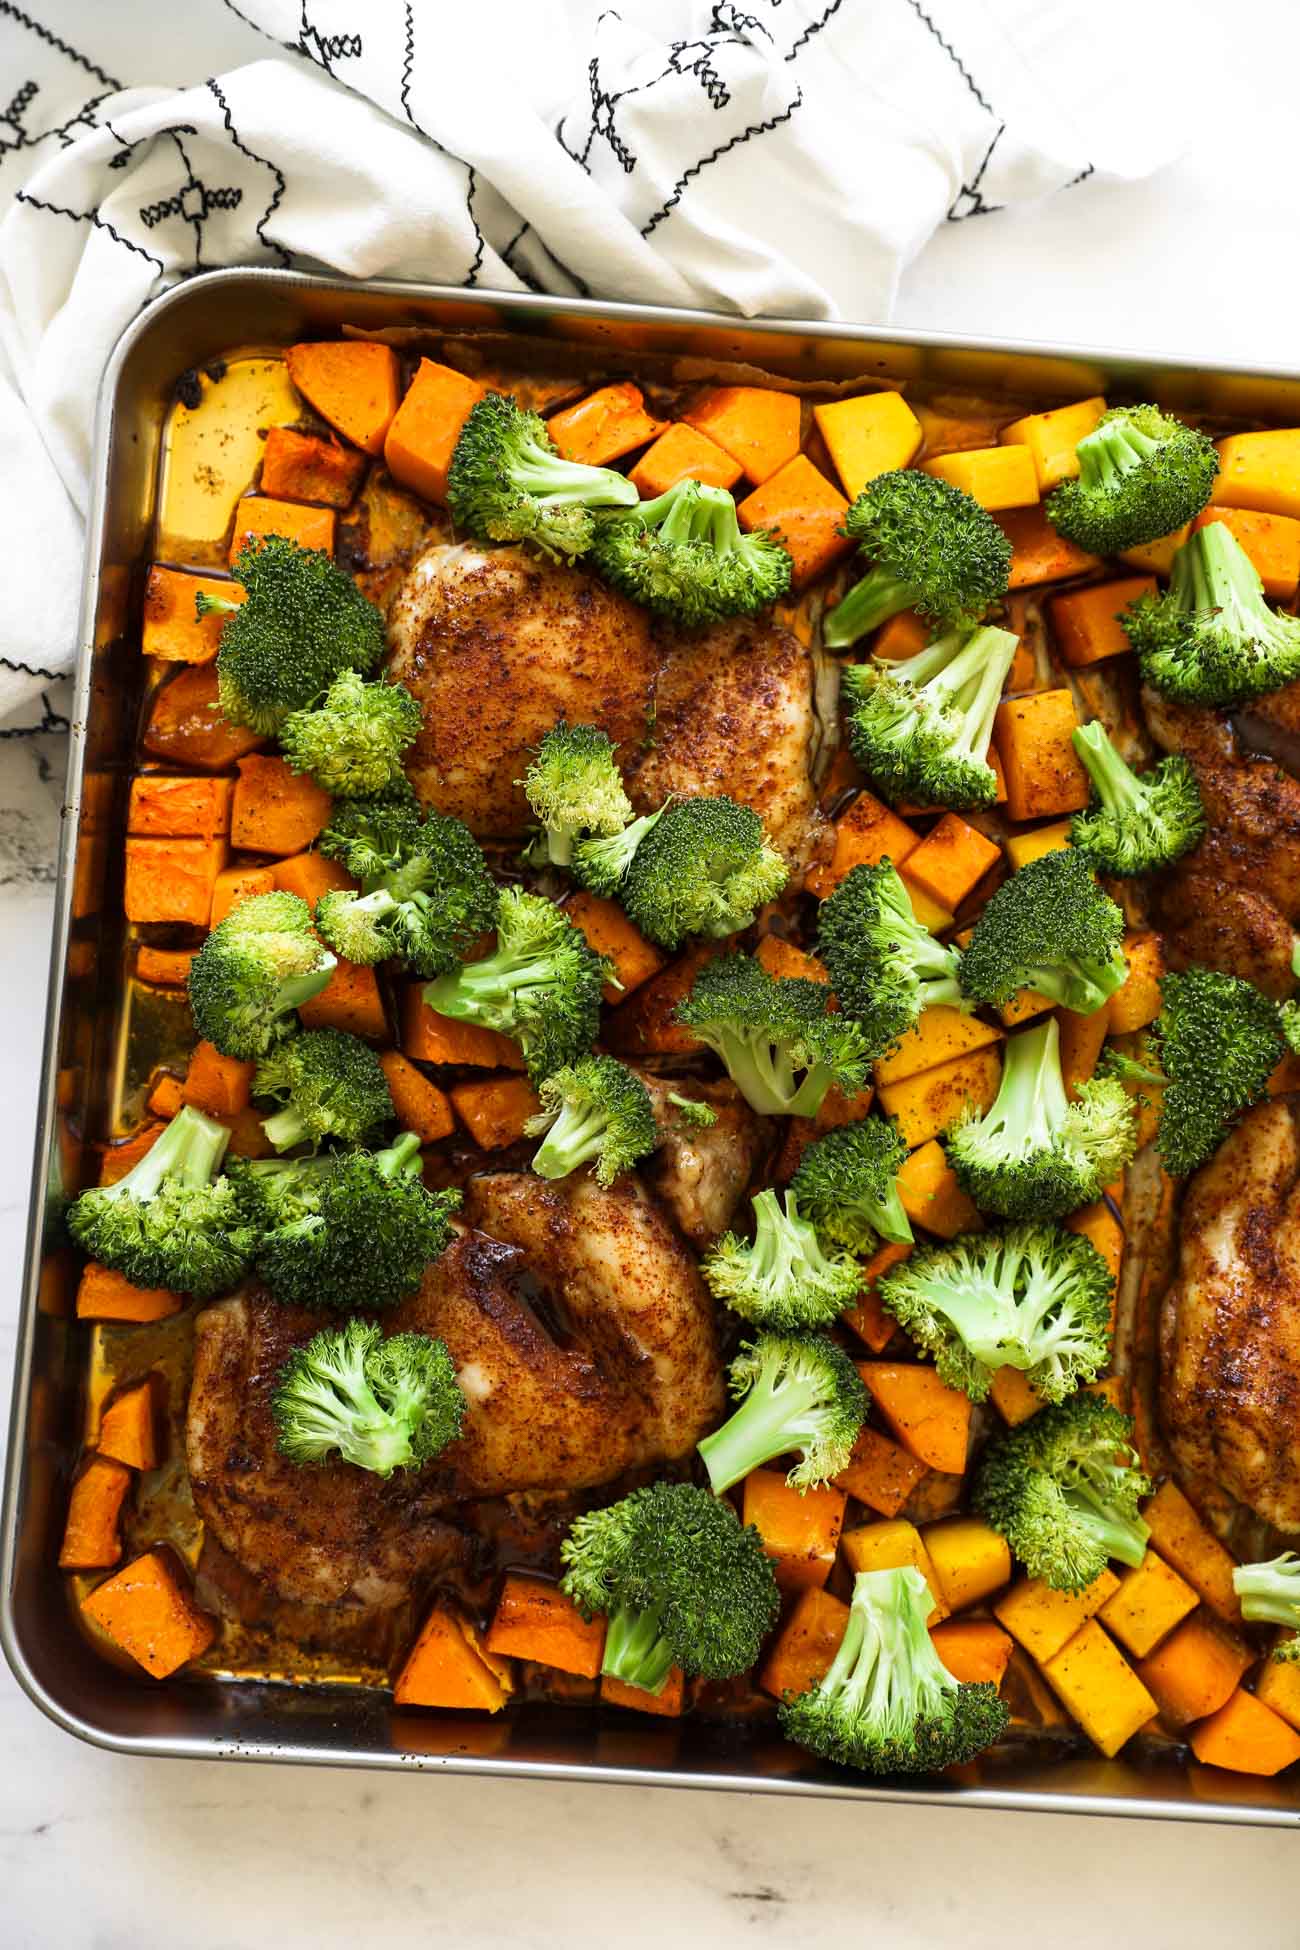 Broccoli with chicken